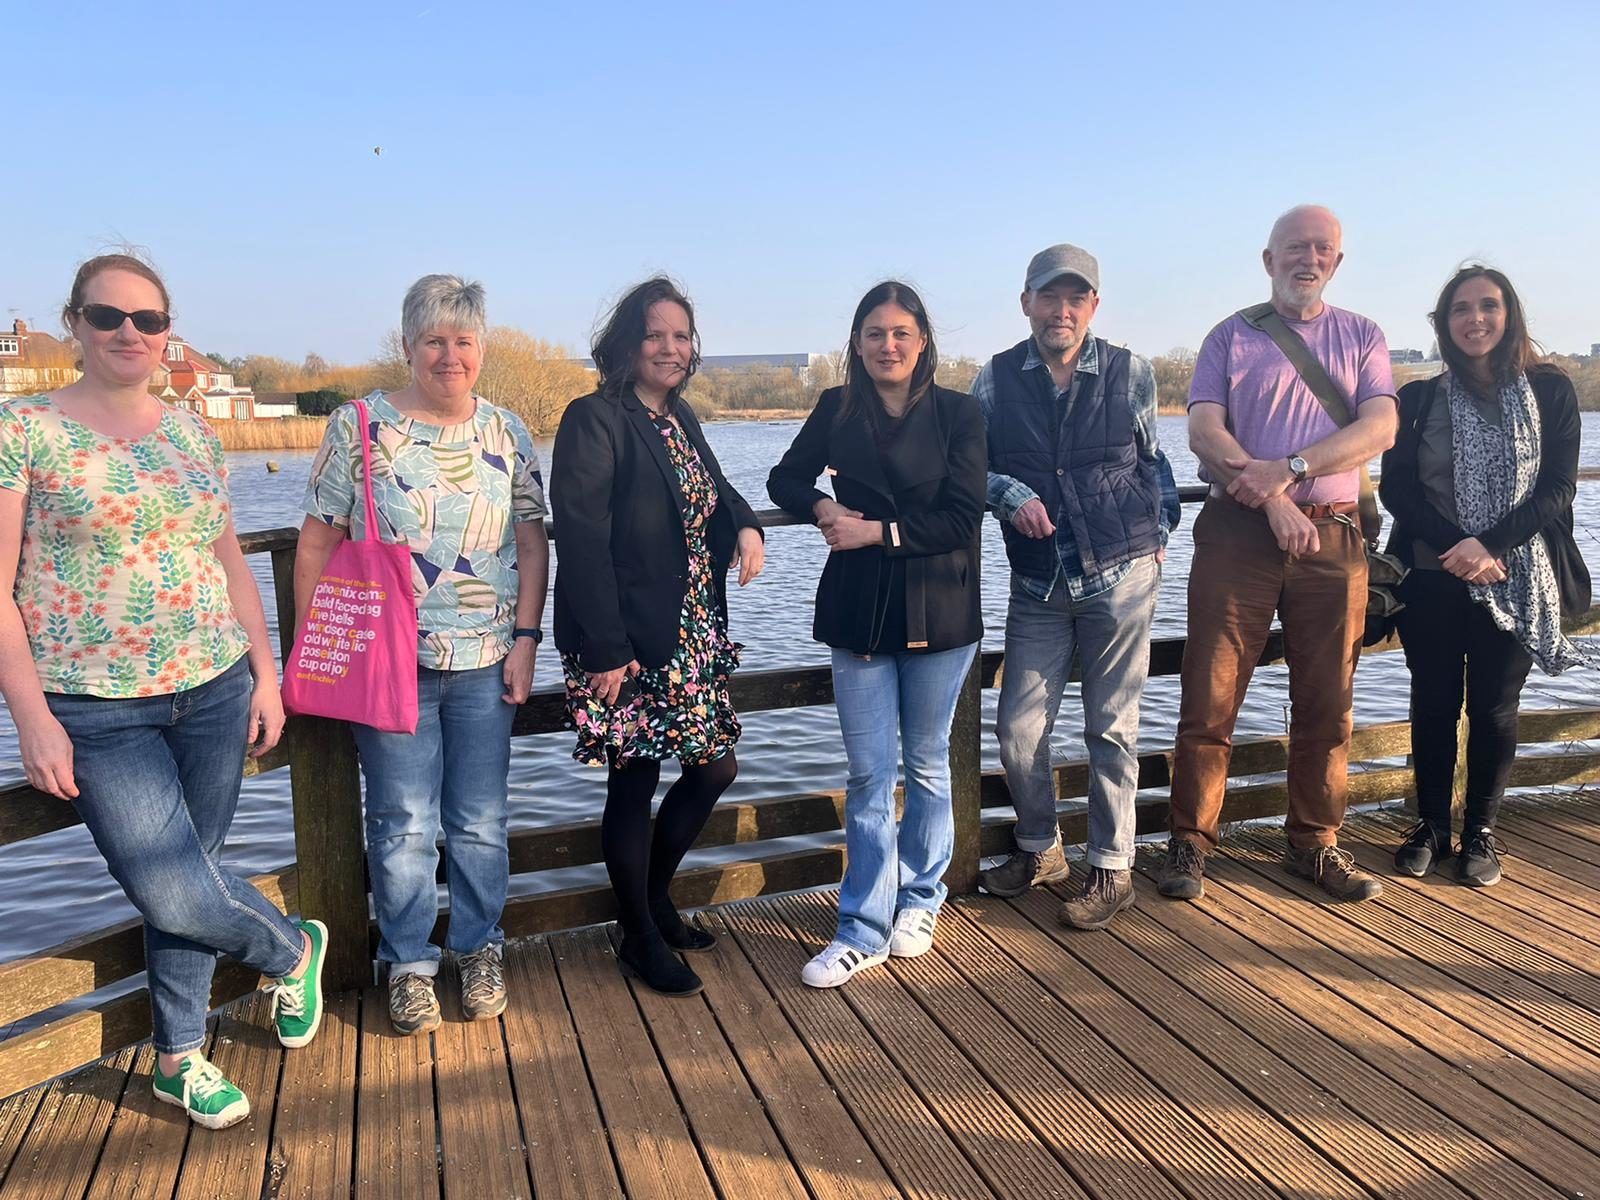 Lisa Nandy MP with community groups on the Welsh Harp